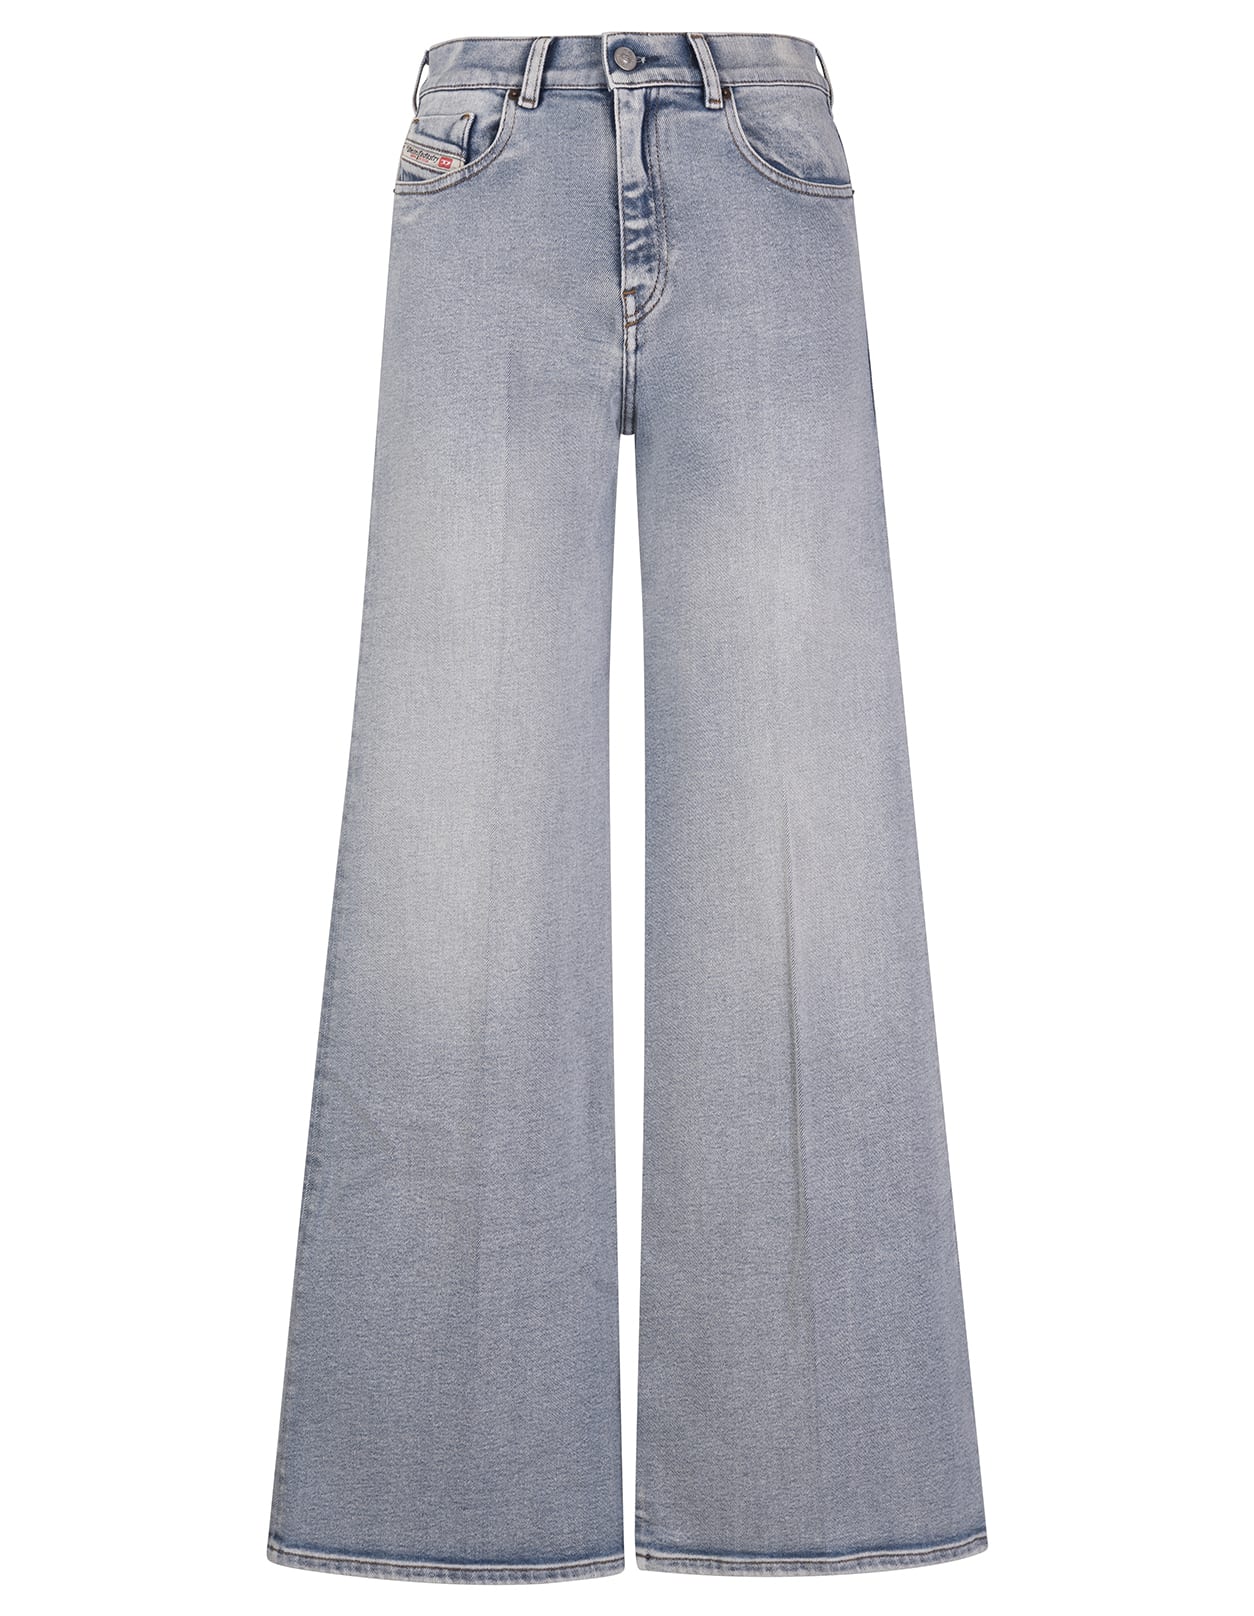 Diesel Woman - Light Blue 1978 09c08 Bootcut And Flare Jeans